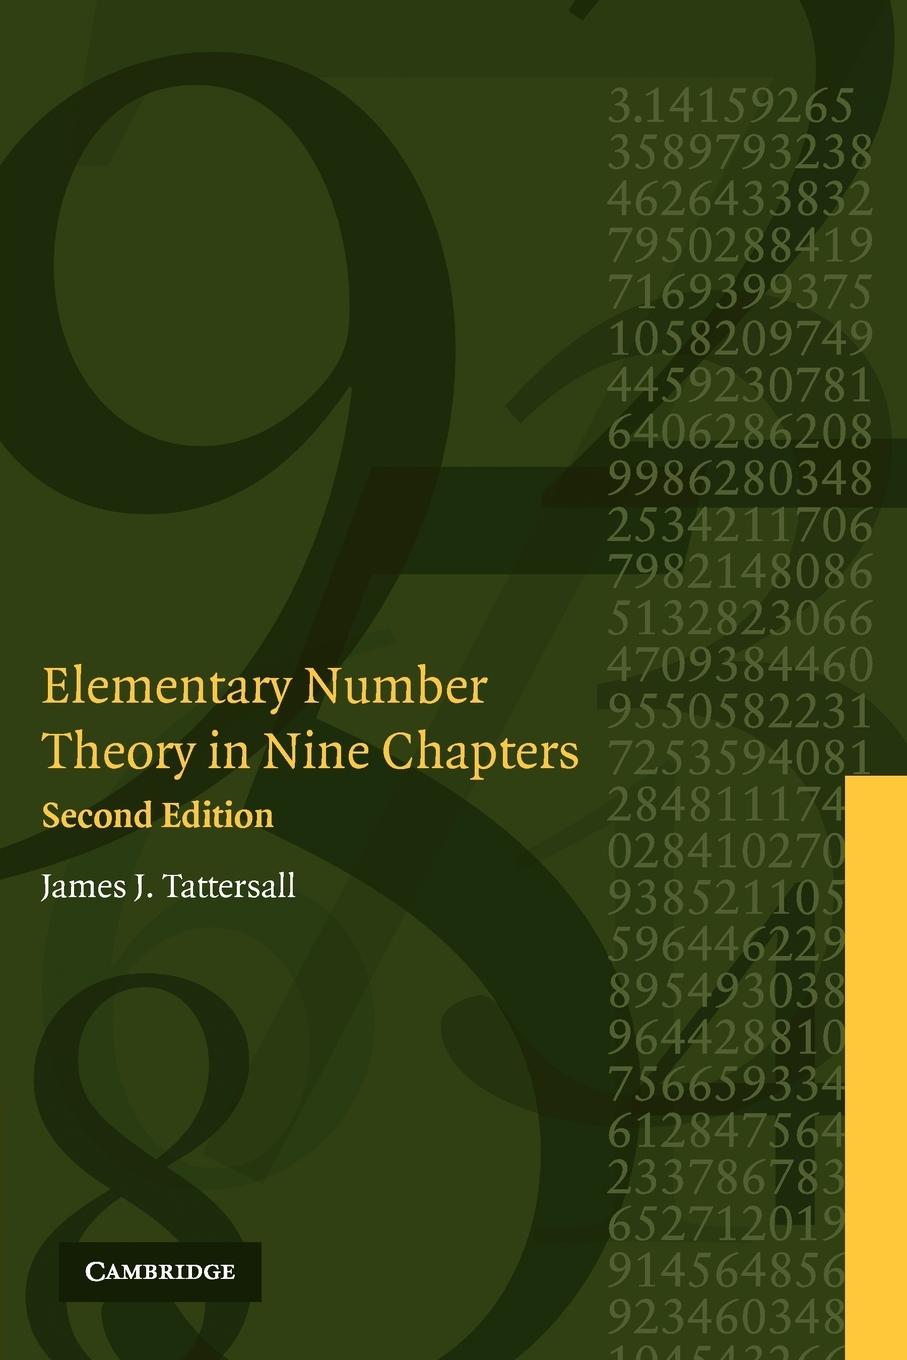 Elementary Number Theory in Nine Chapters - Tattersall, James J.